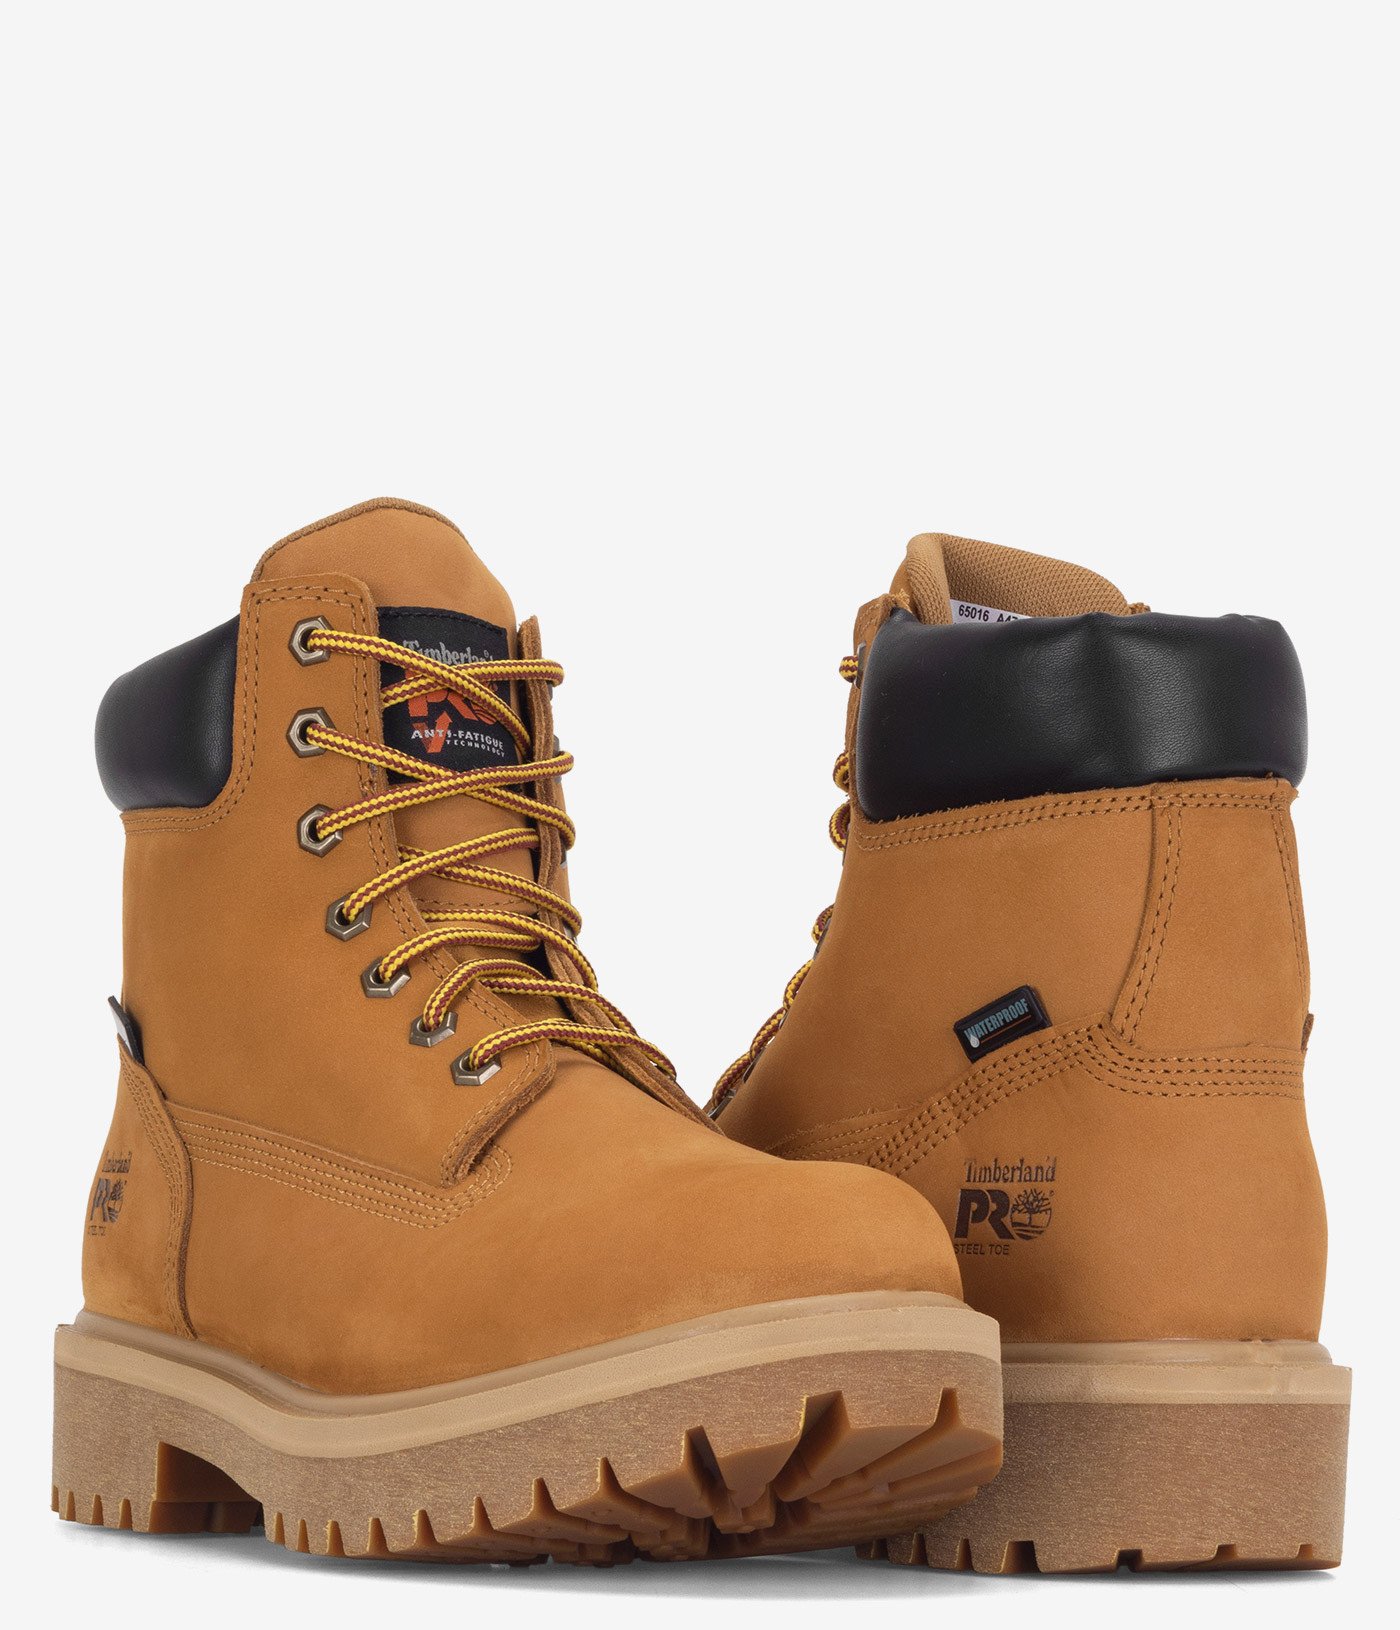 Timberland PRO Direct Attach 6” Waterproof Safety Toe EH Work Boot | Pair